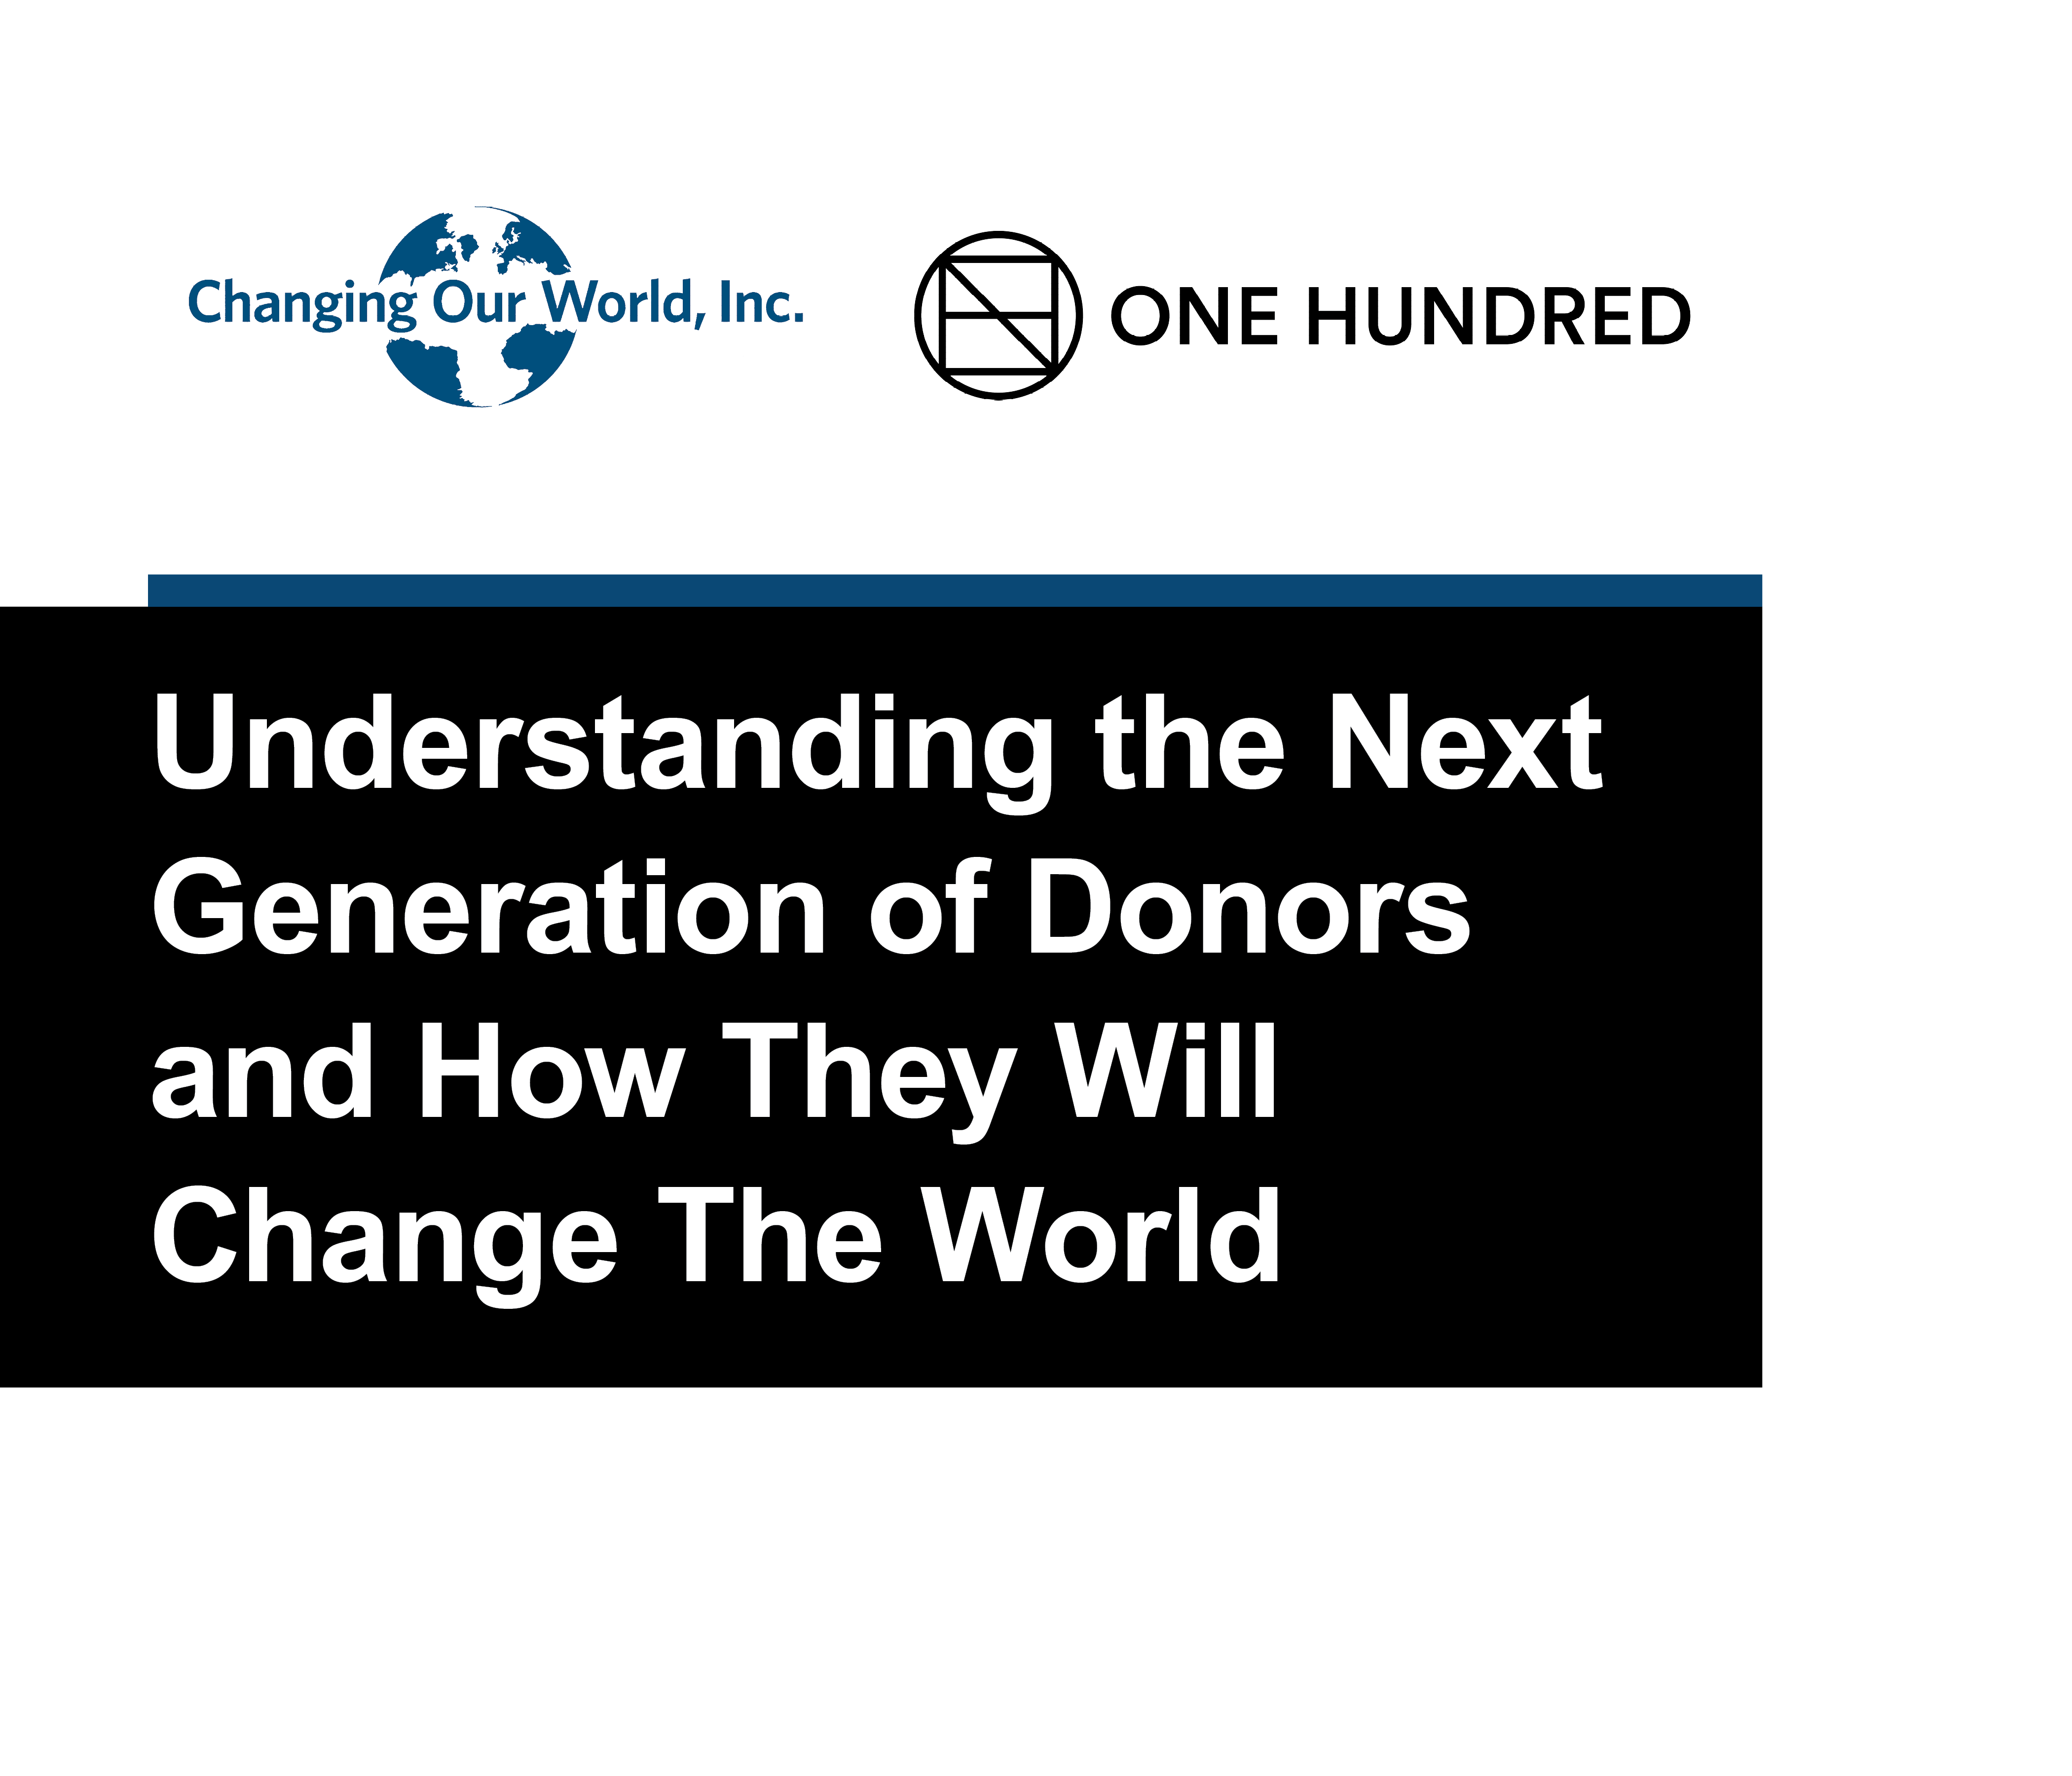 Understanding the next generation of donors and how they will change the world.